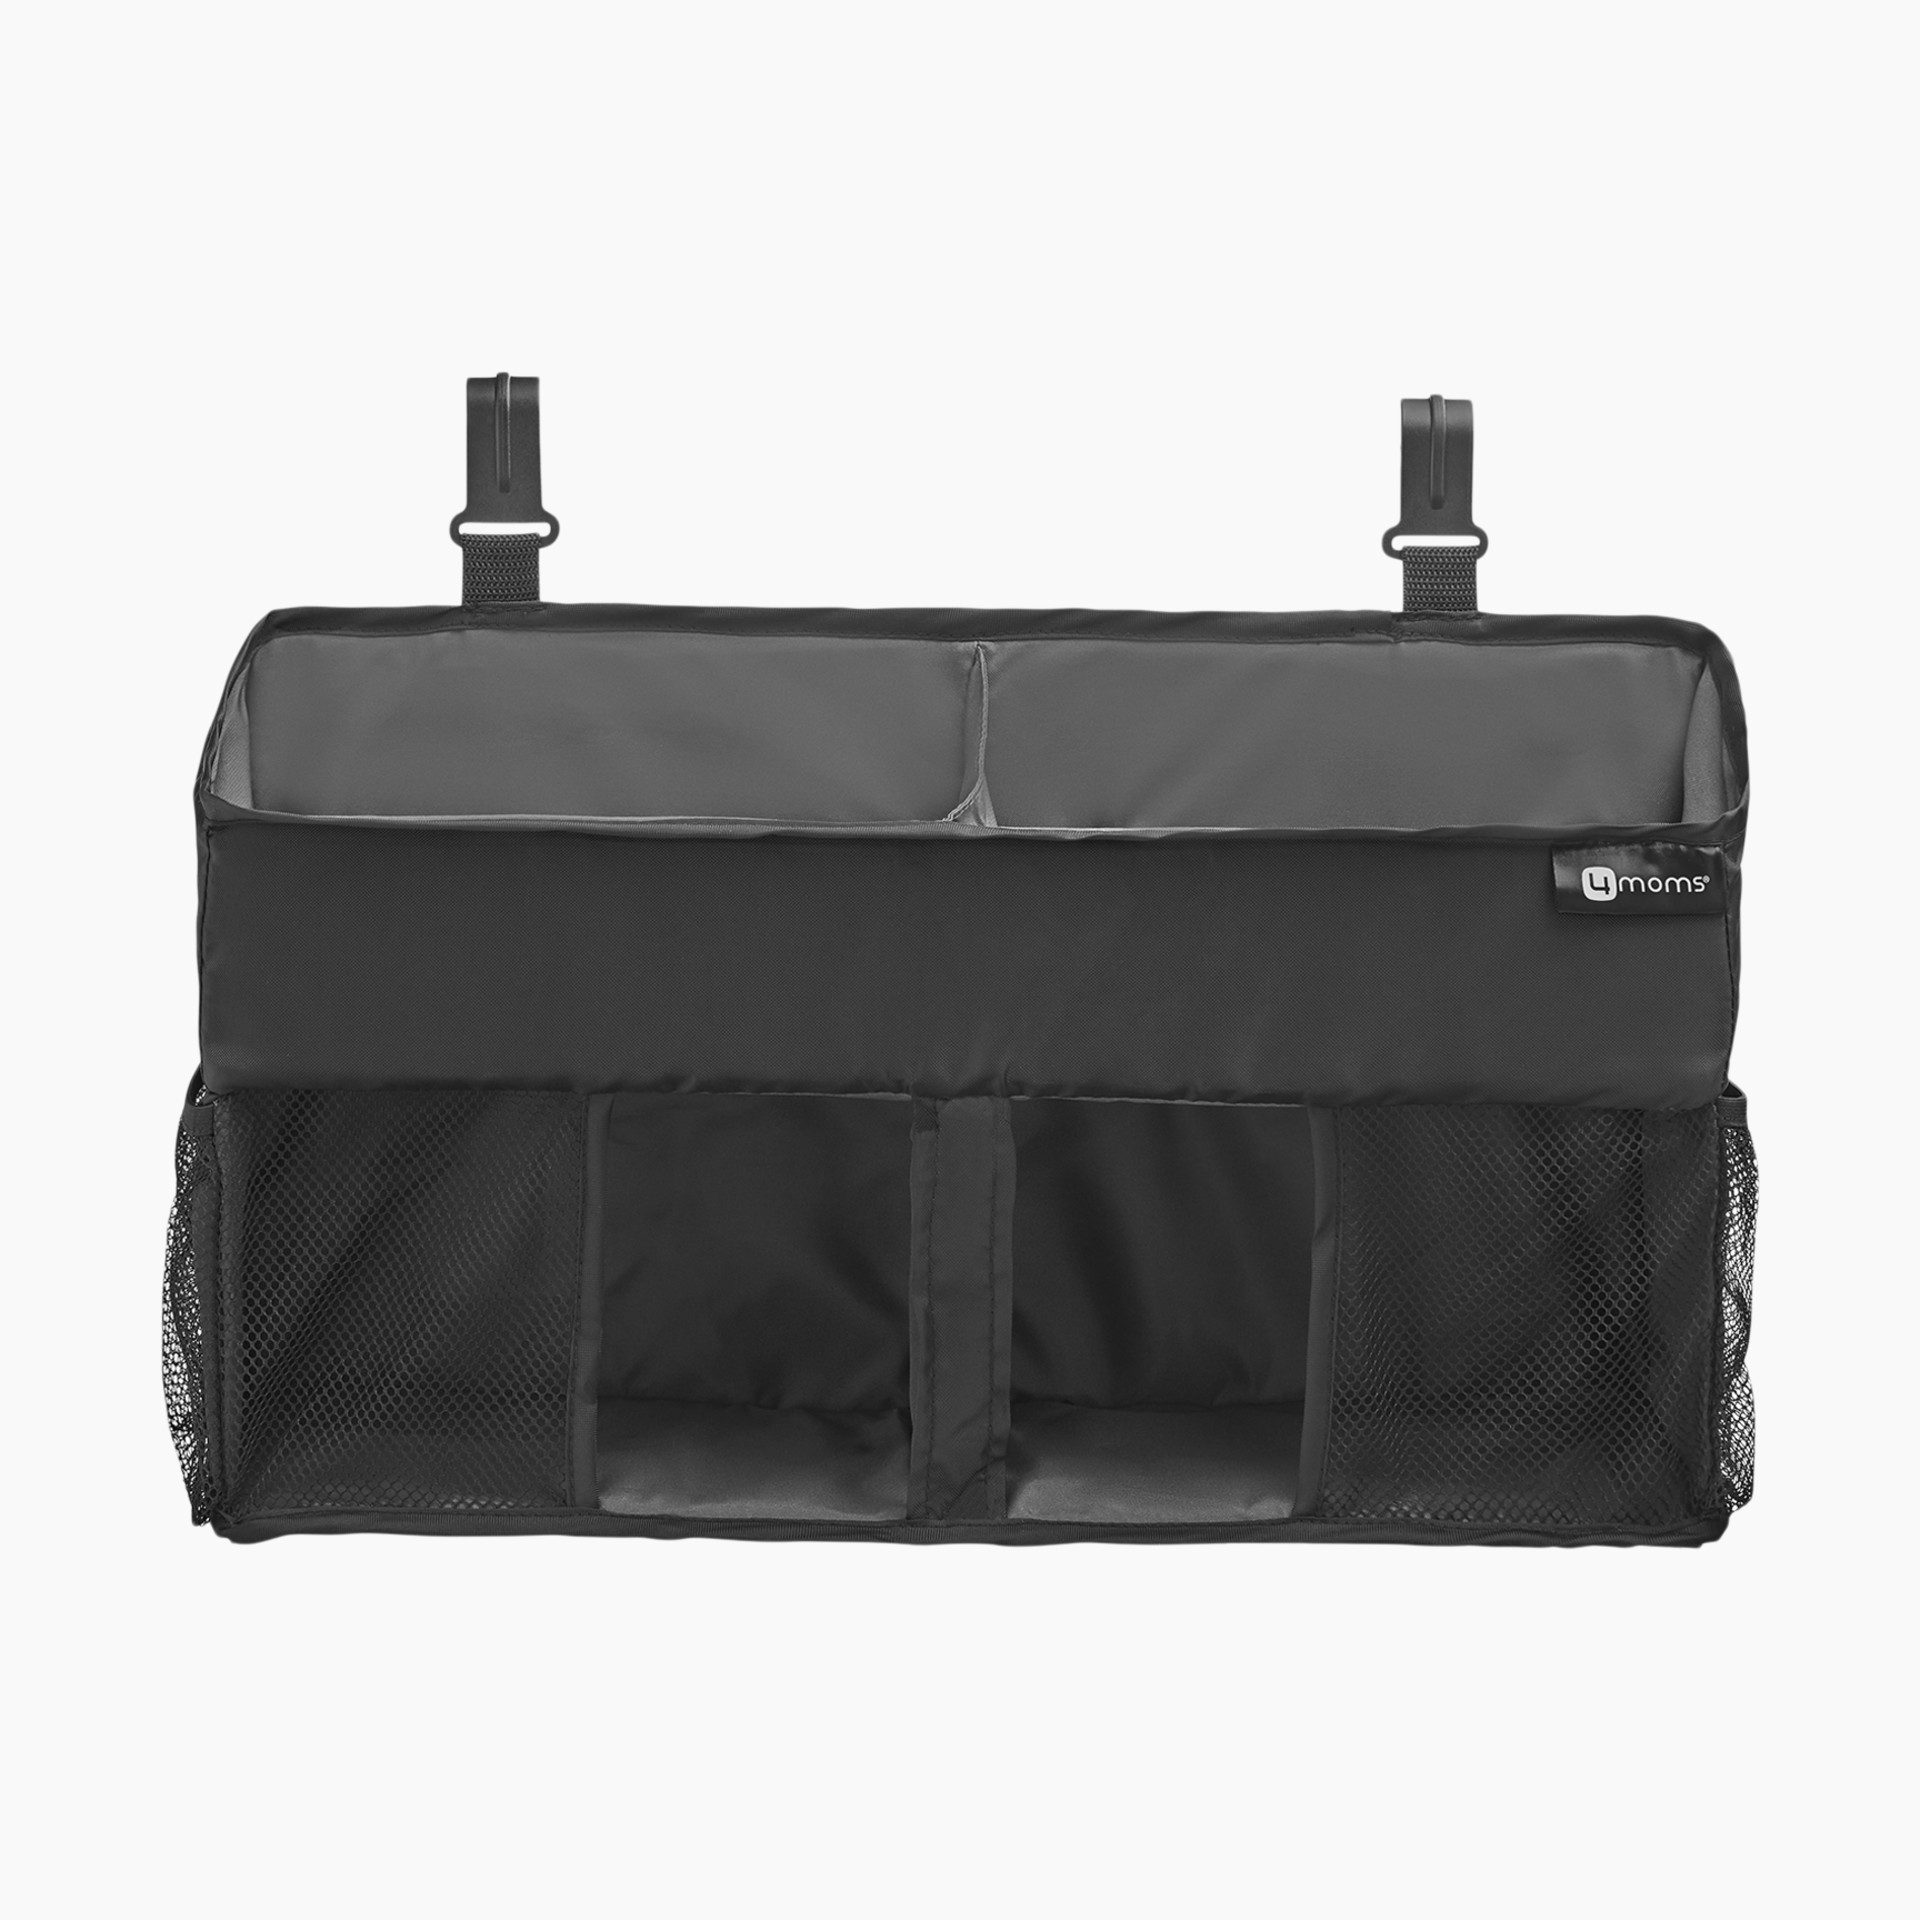 Buy Comicfs Baby Diaper Bag Insert Organizer with Comicfs cleaning cloth  (Dimensions: 12 X 6.4 X 8 Inch, Black) Online at Low Prices in India 